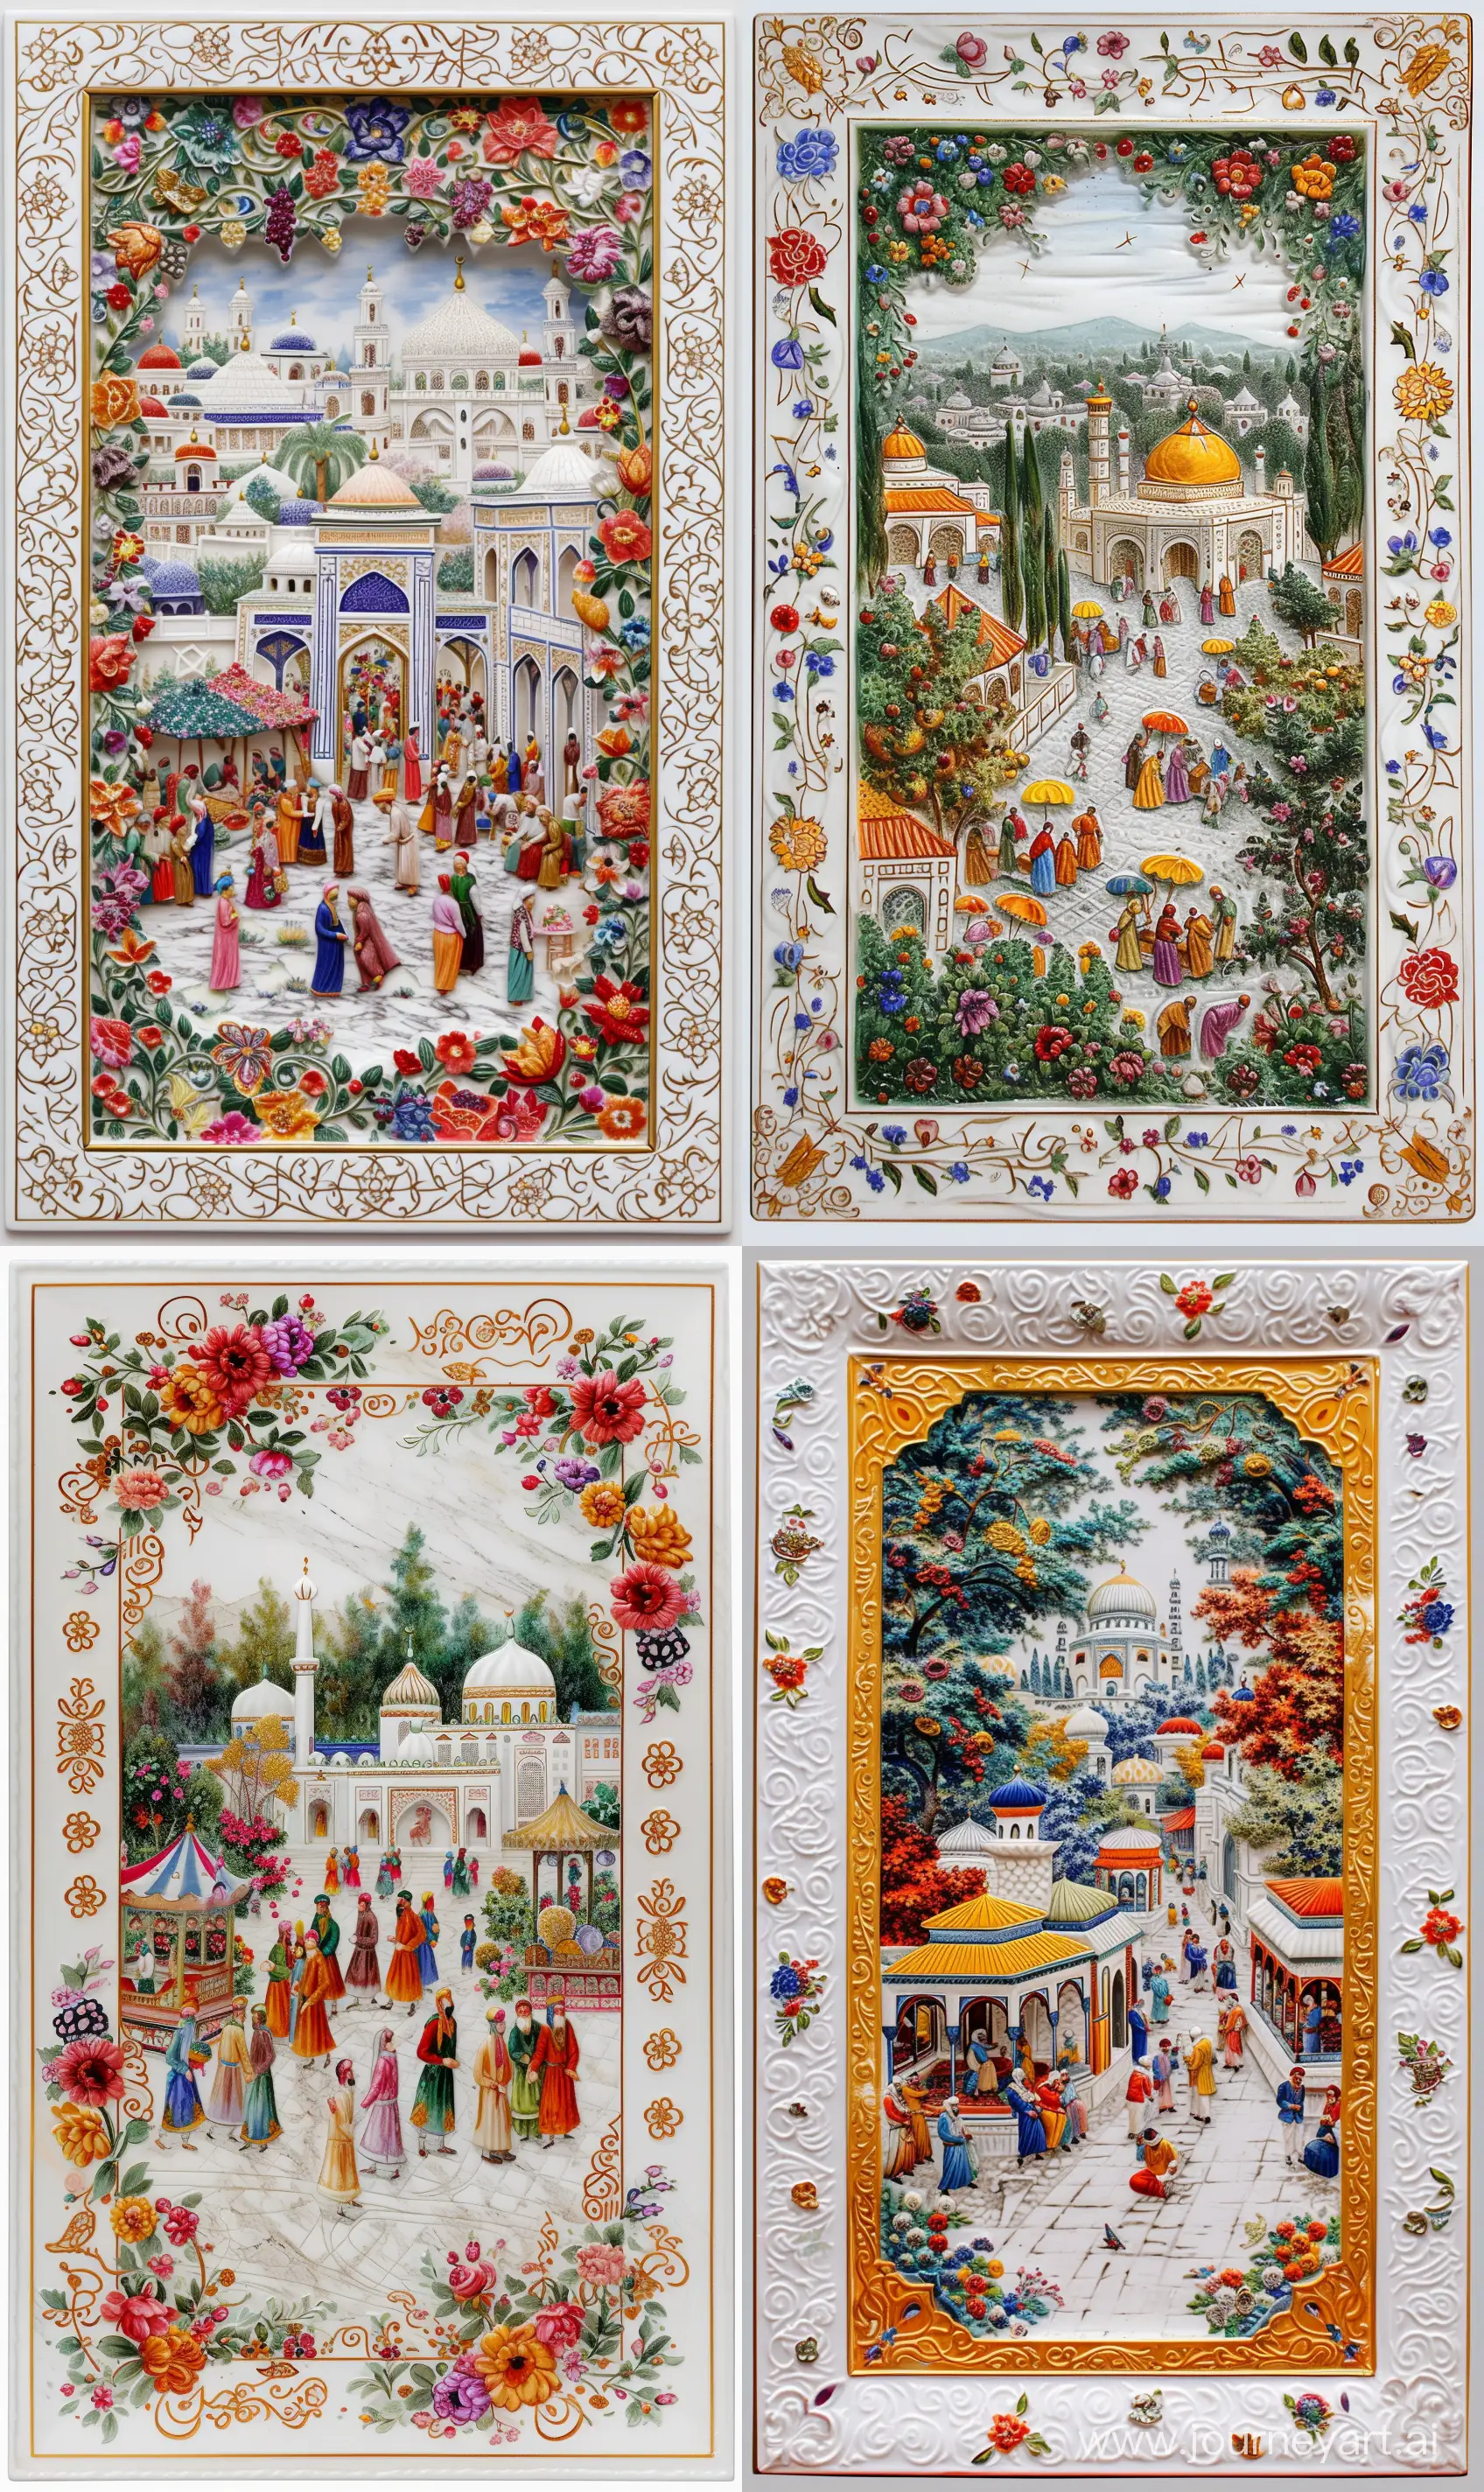 A colorful Persian miniature painting scenery carved on an Iznik porcelain depicting mosque and garden marketplace, framed within solid 3d embossed islamic arabesque floral motifs on white marbled border, straight edges, shiny metallic gold outlines --s 150 --ar 3:5